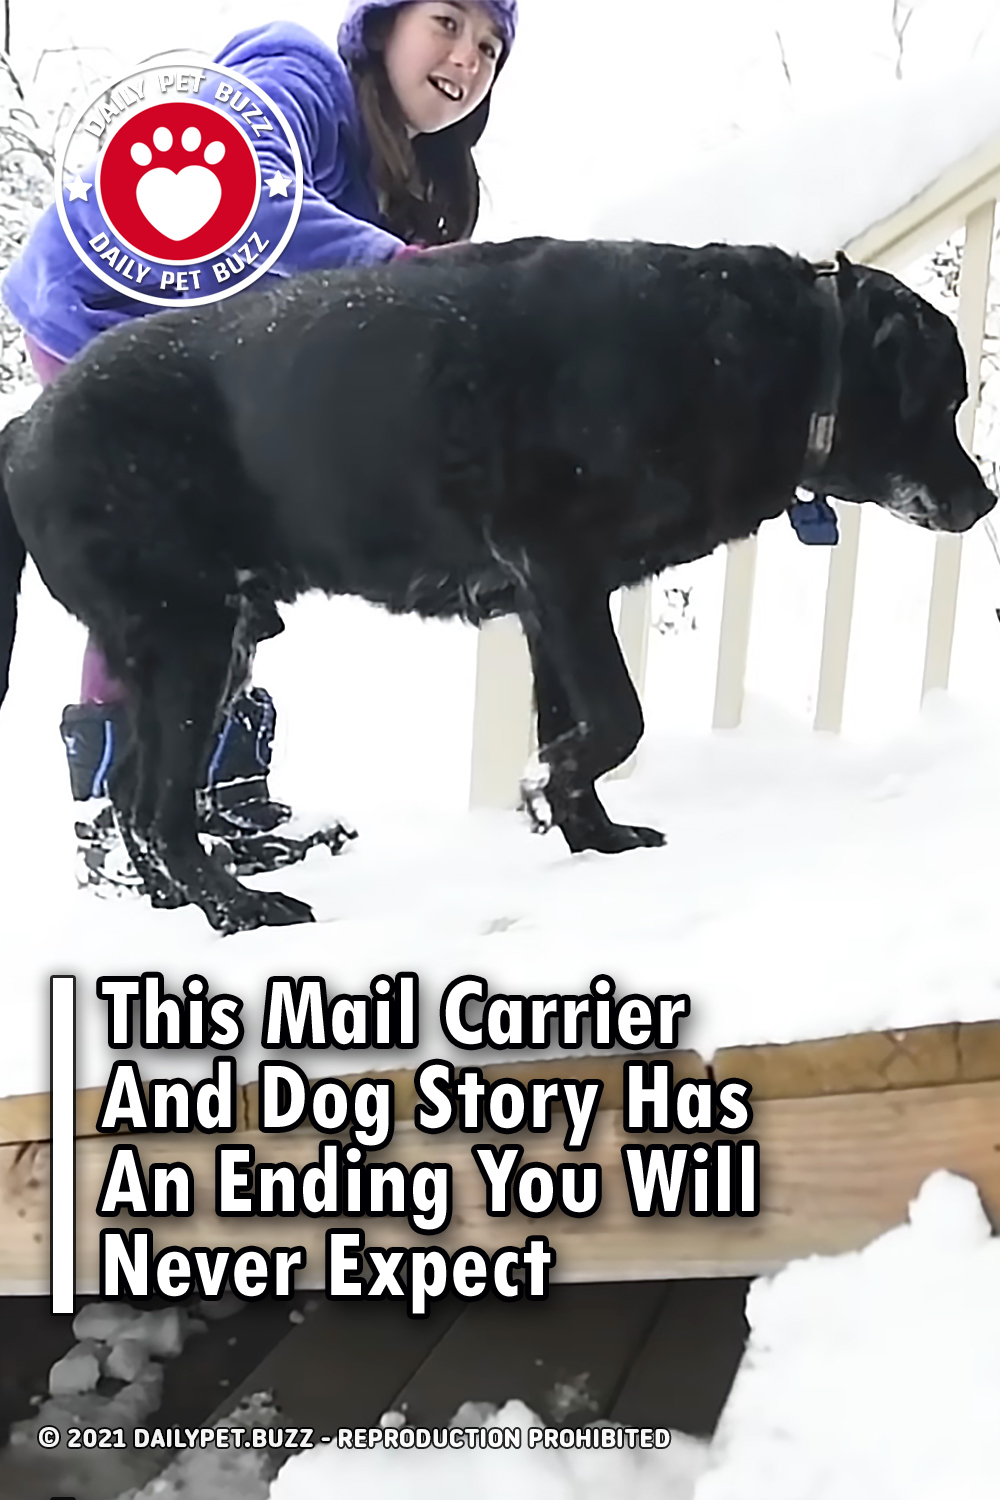 This Mail Carrier And Dog Story Has An Ending You Will Never Expect